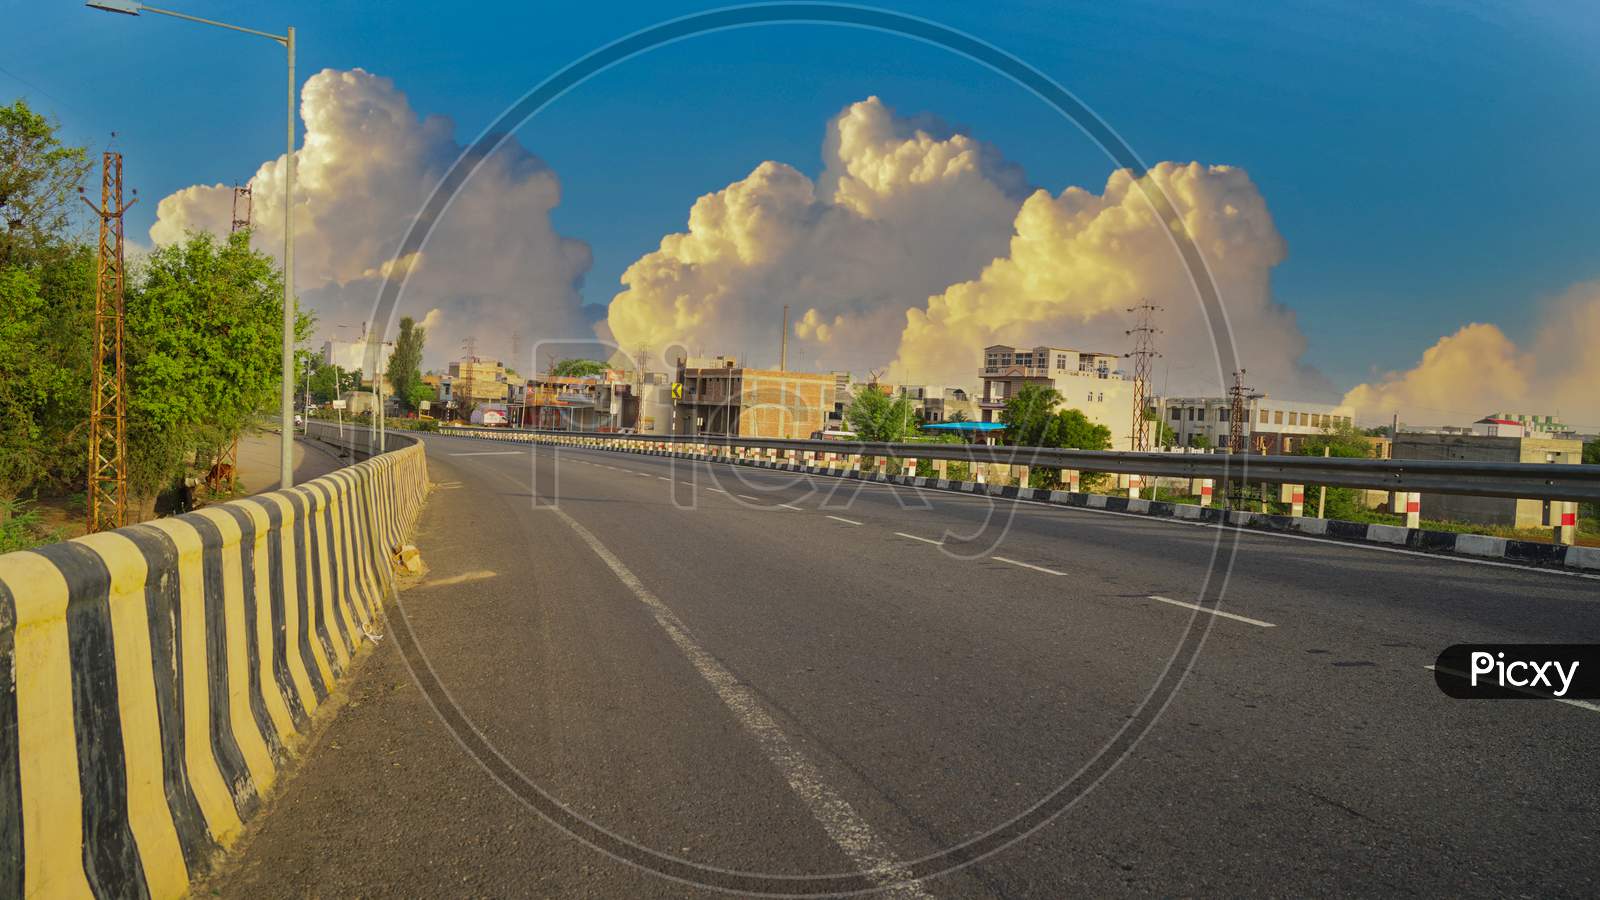 Asphalt Road And City Skyline With Buildings In Jaipur, India. Cloudy Sky And Highway Landscape.